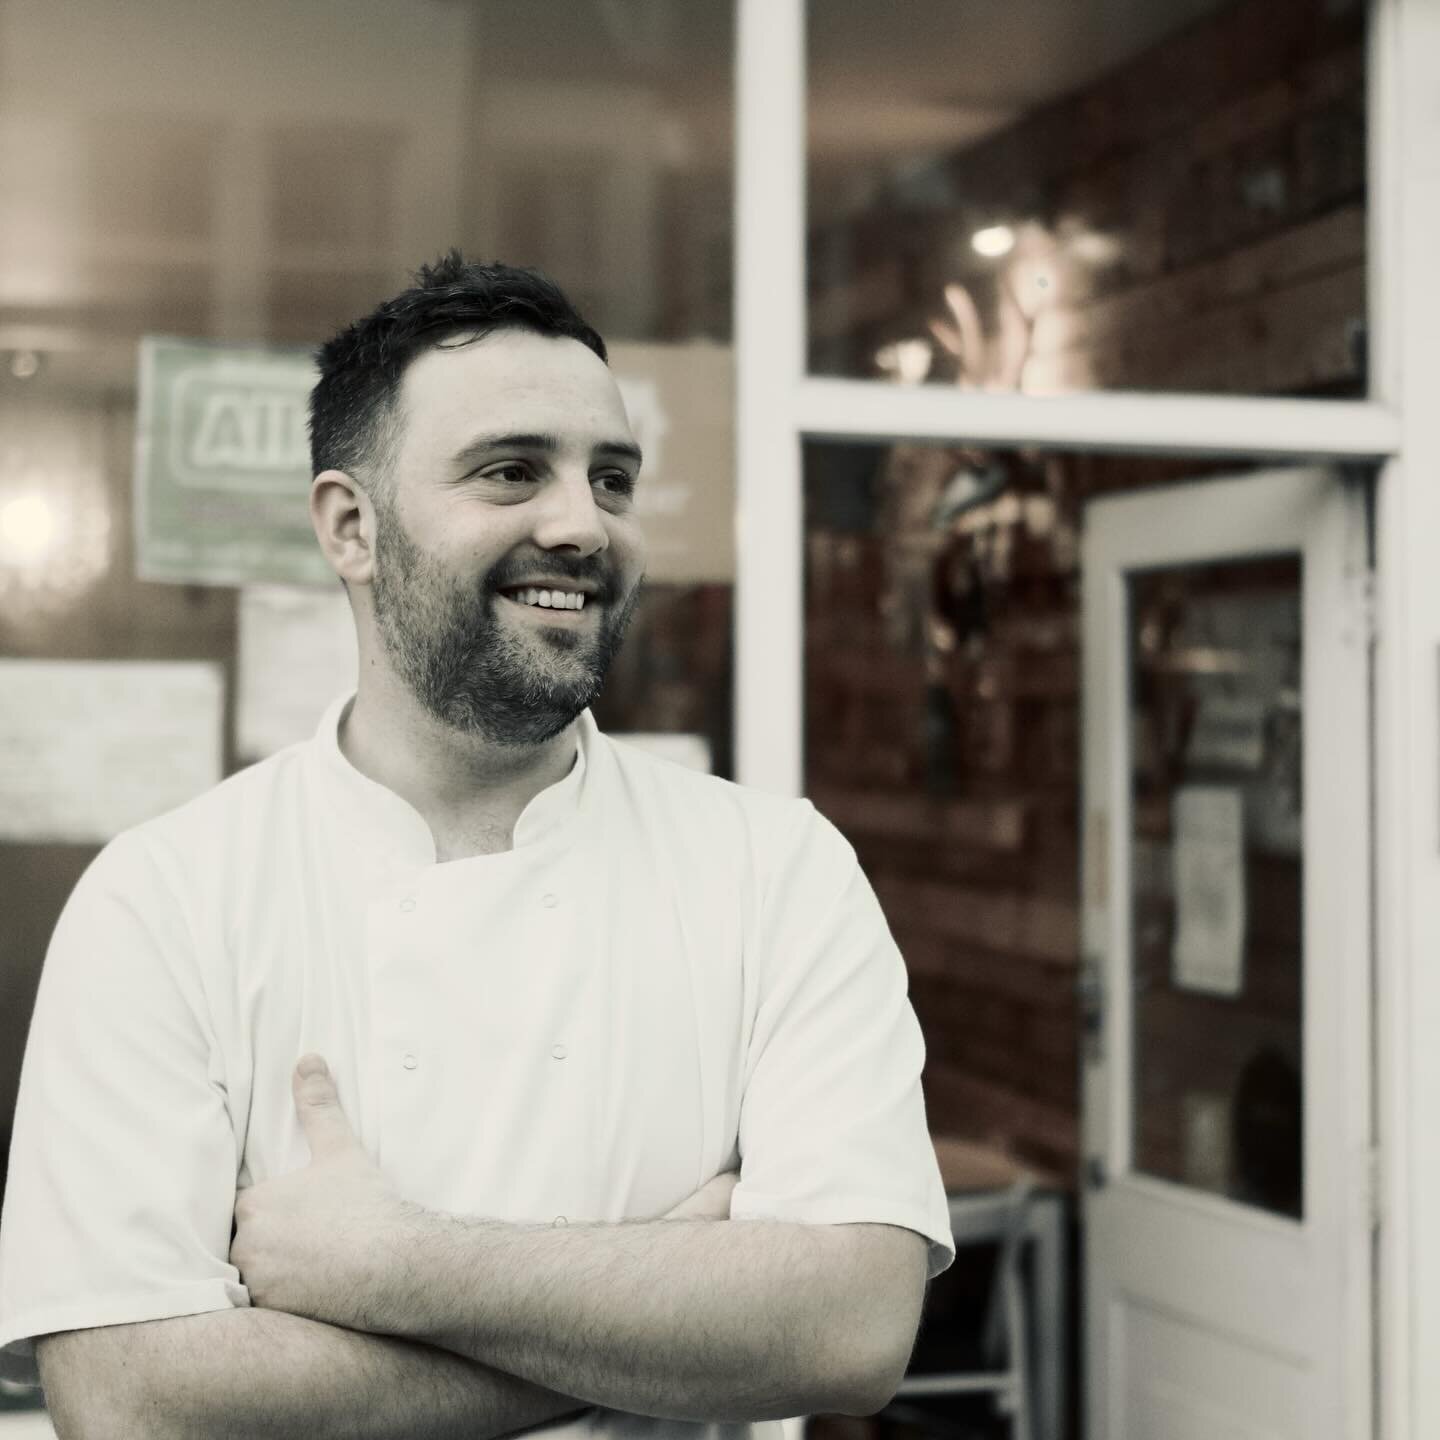 And here&rsquo;s a wee announcement 💥

Everyone, this is Jamie !

Ex Claude Bosi, head chef at Gordon Ramsay&rsquo;s London House &amp; head chef at Wimbledon, after inspiring travels in South America, some sell out pop-ups, supper clubs and private